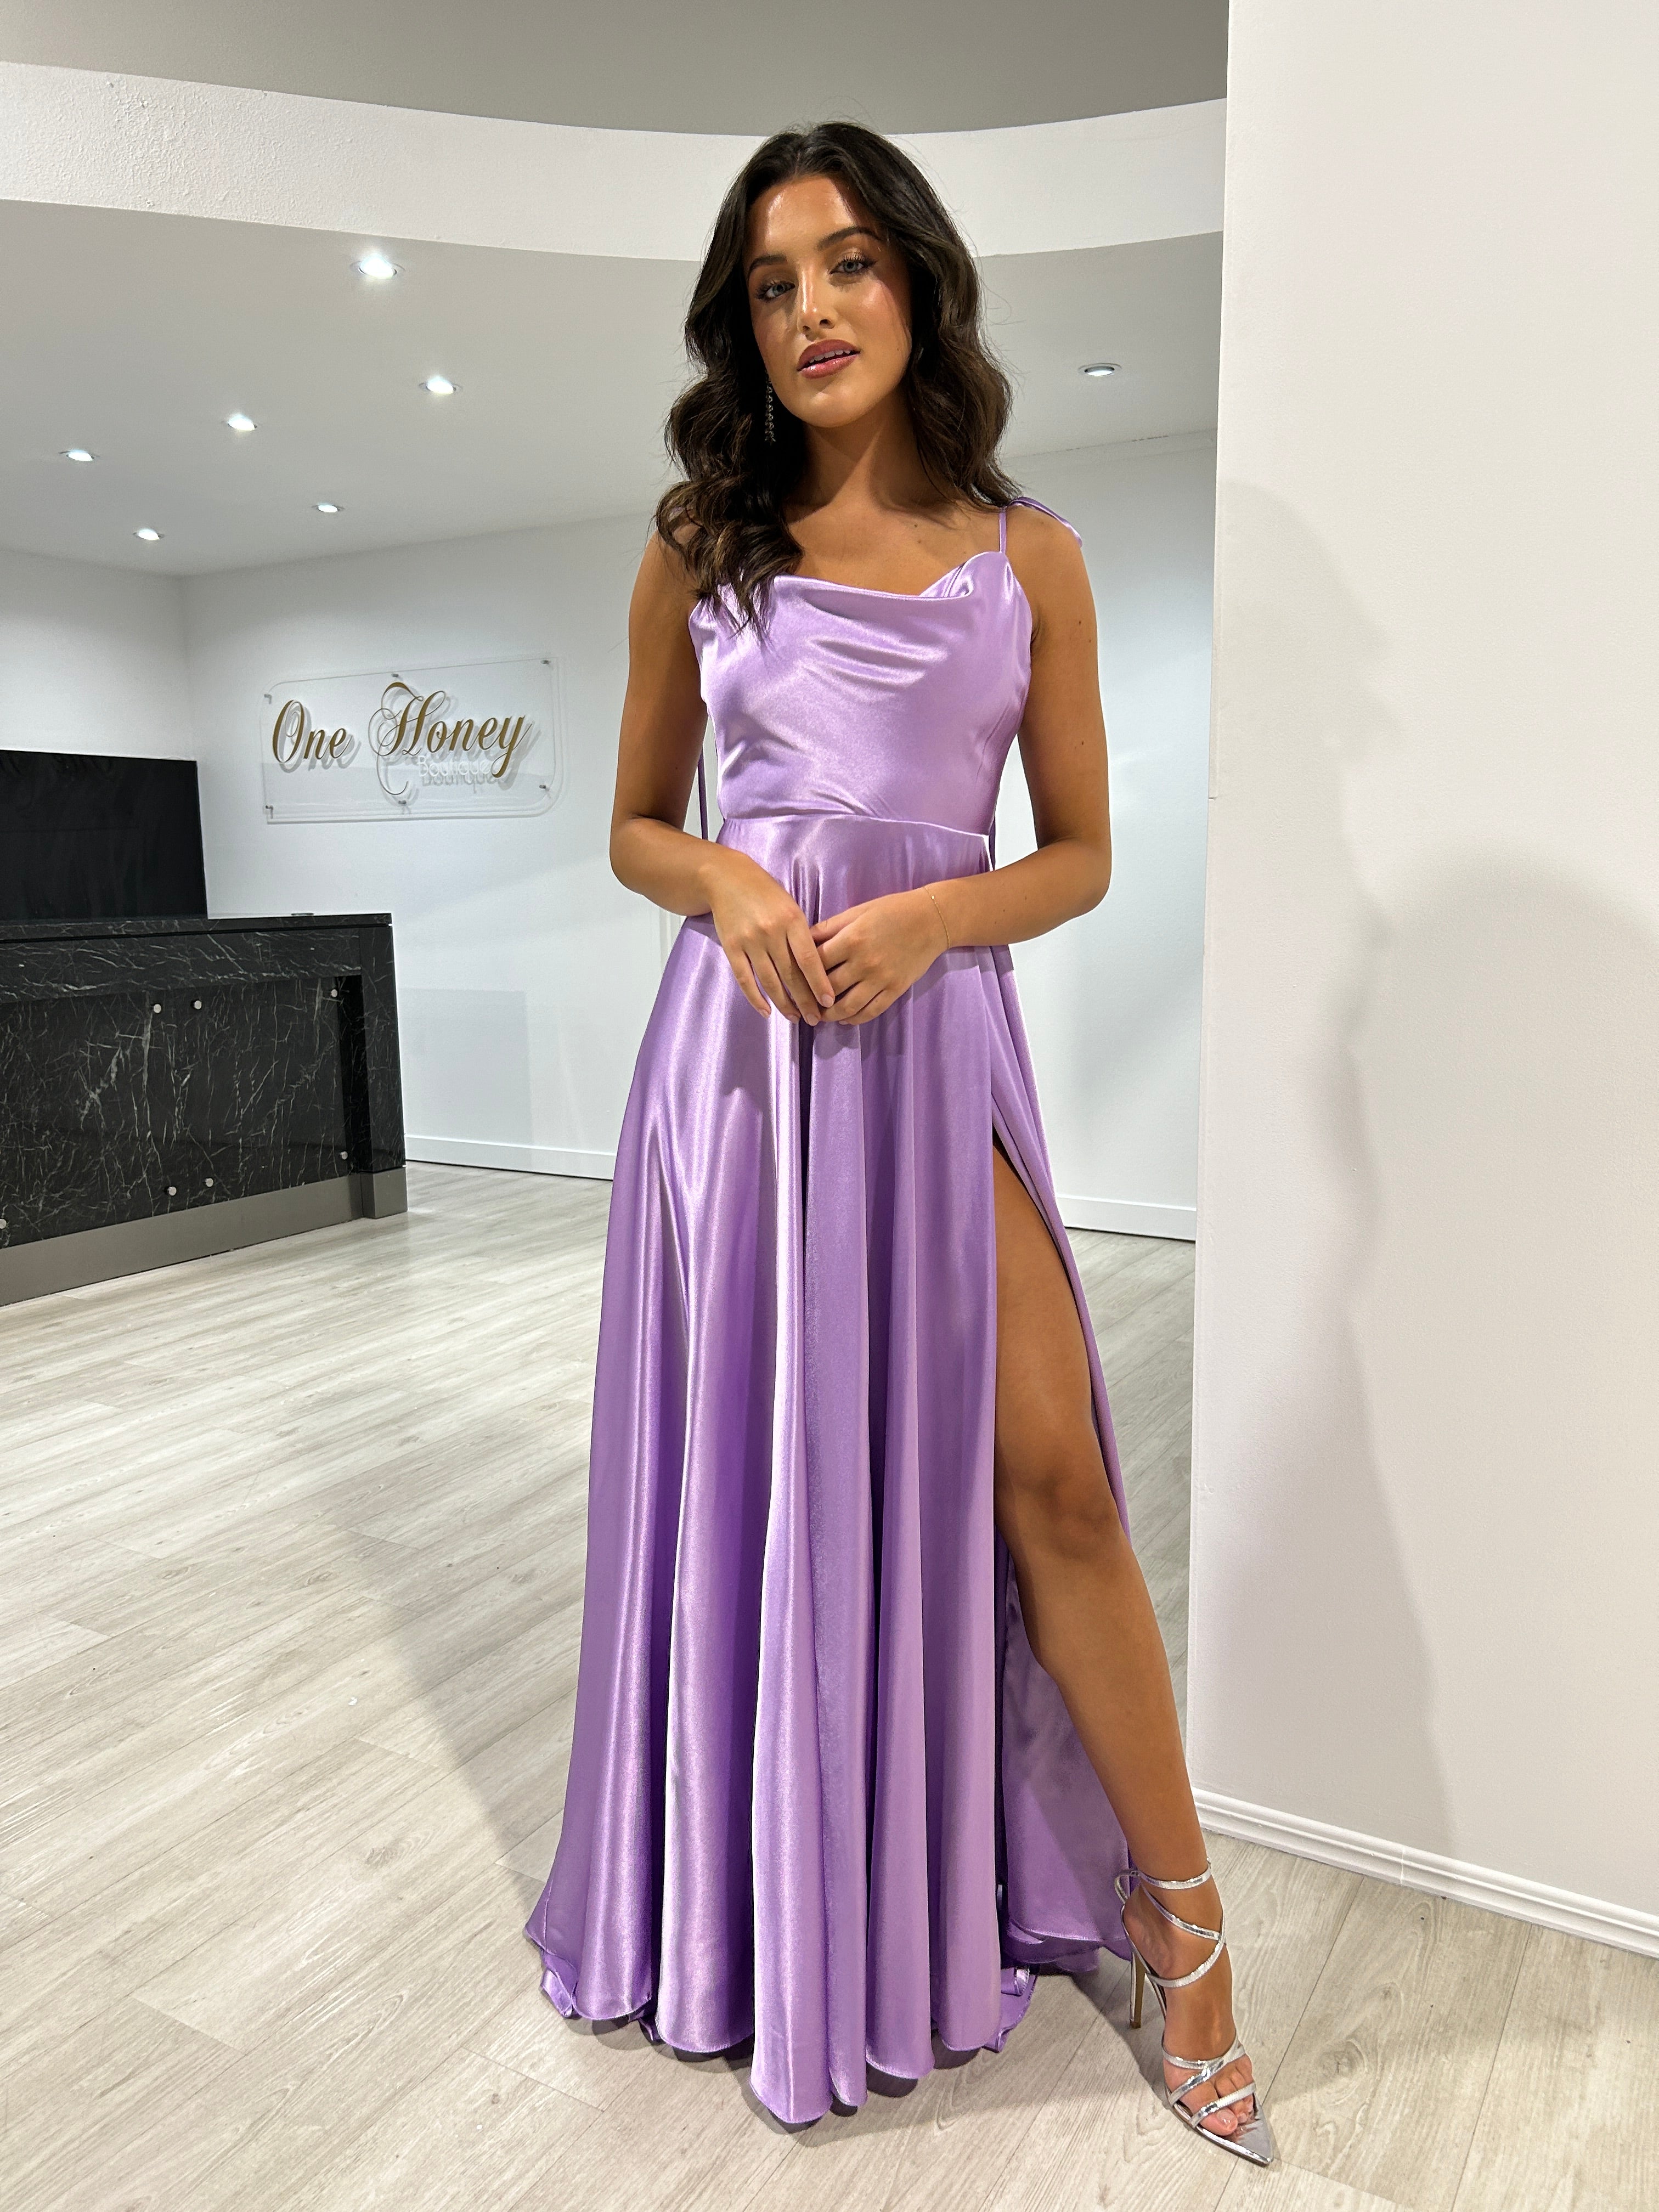 Honey Couture XENA Lavender Tie Up A-Line Formal Bridesmaid Dress